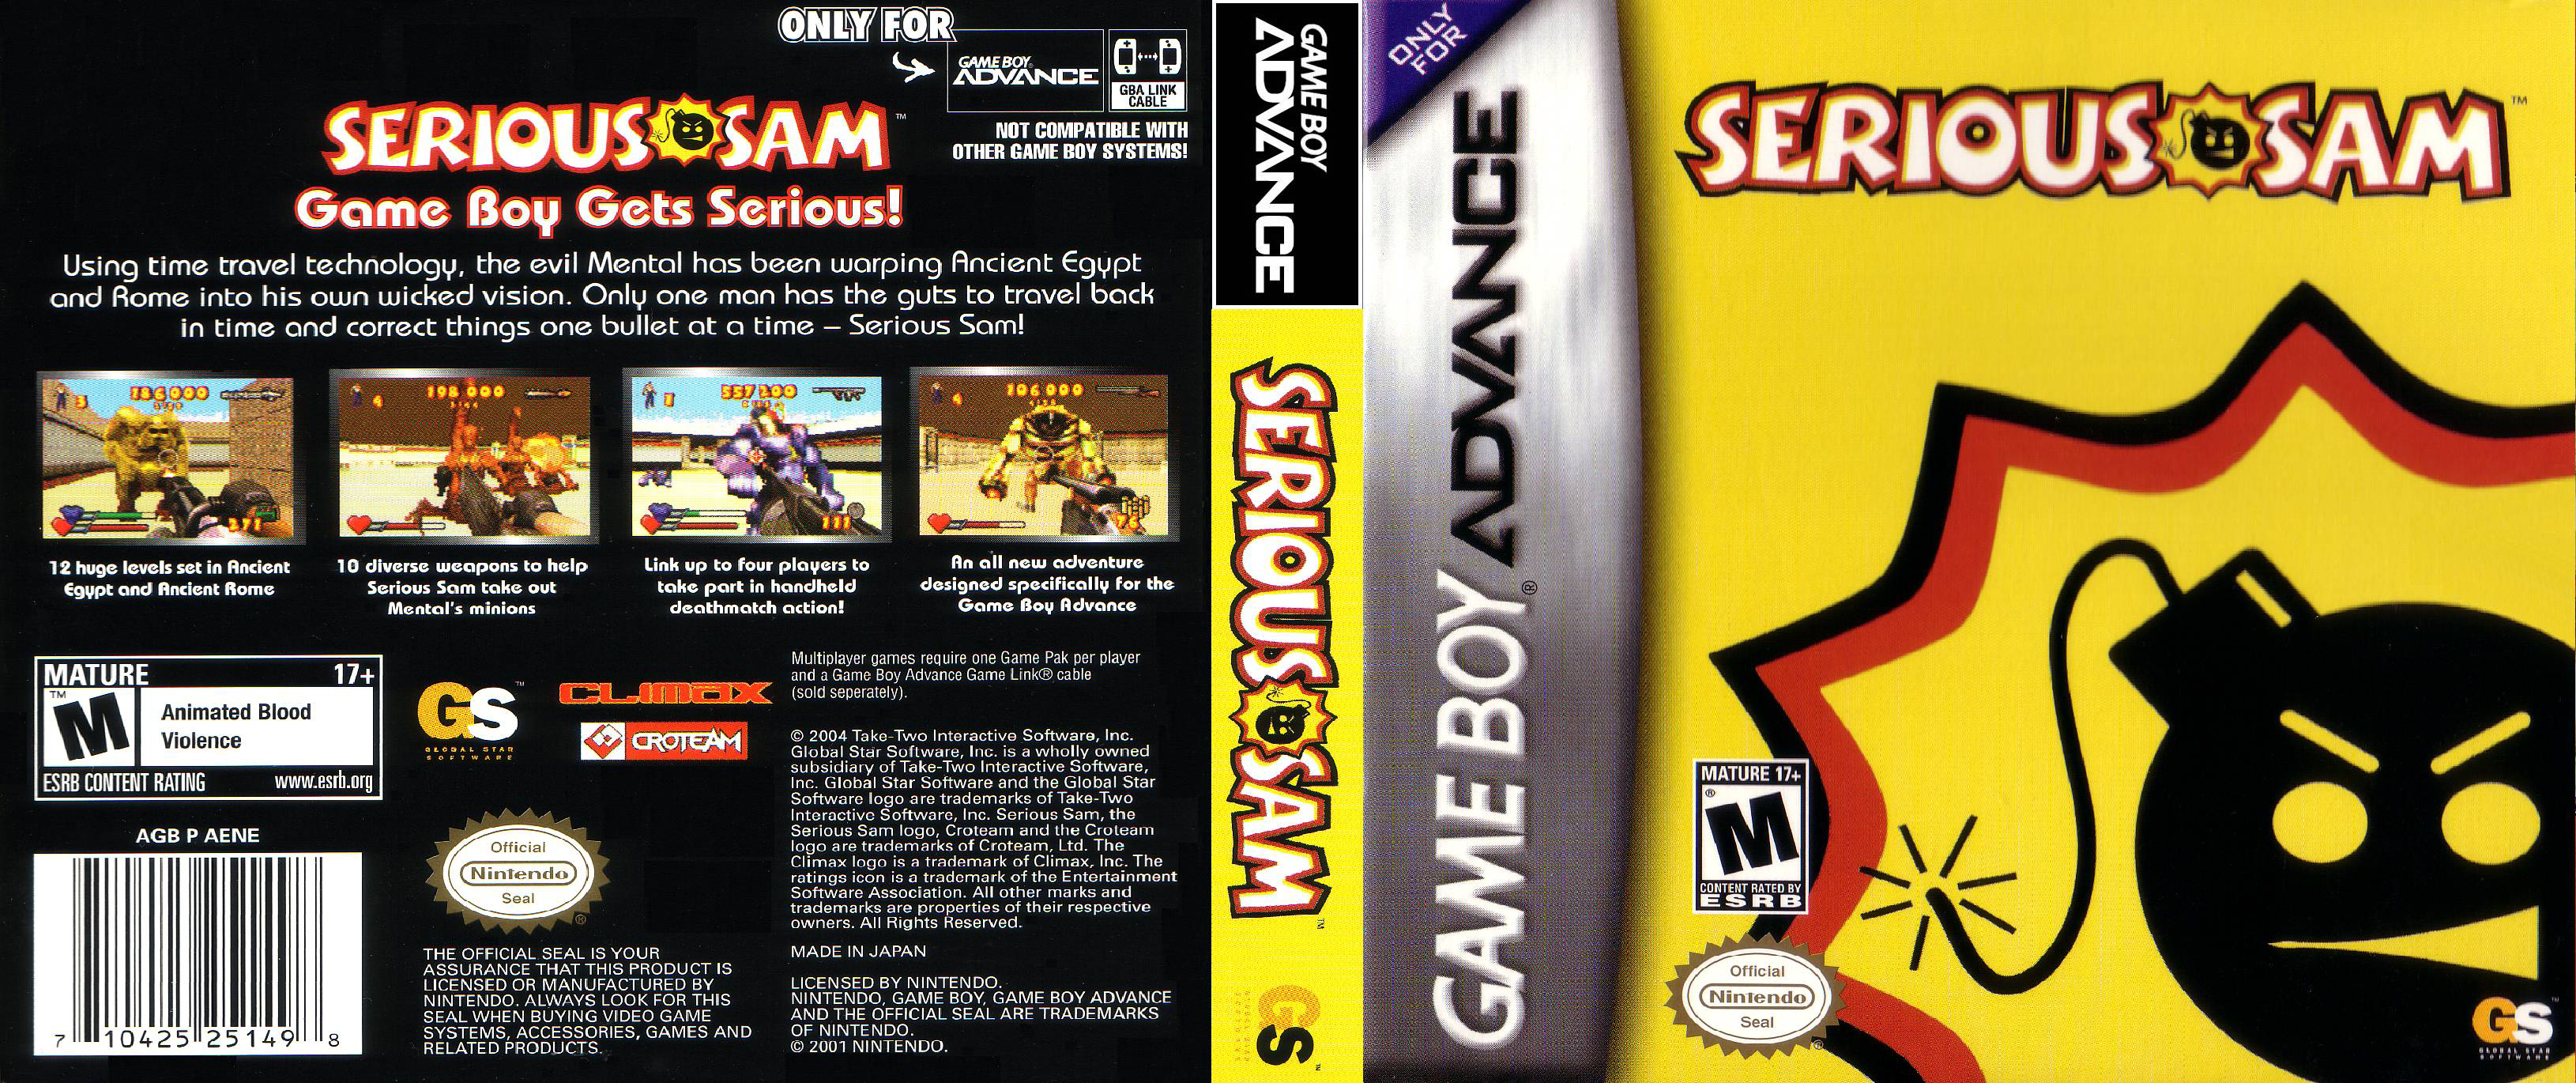 Serious Sam Advance | Gameboy Advance Covers | Cover Century 